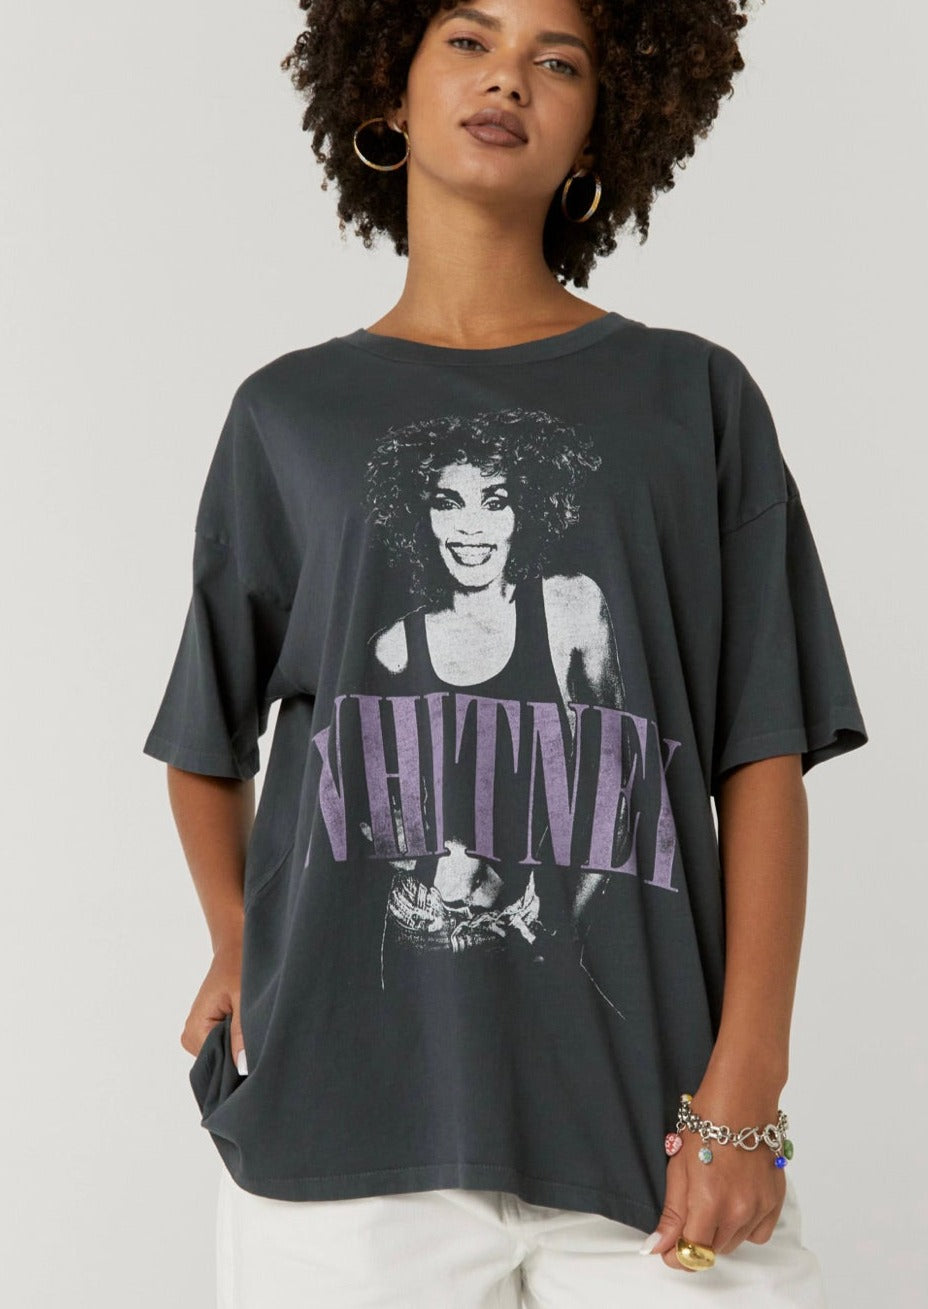 WHITNEY HOUSTON FOR THE LOVE OF YOU MERCH TEE